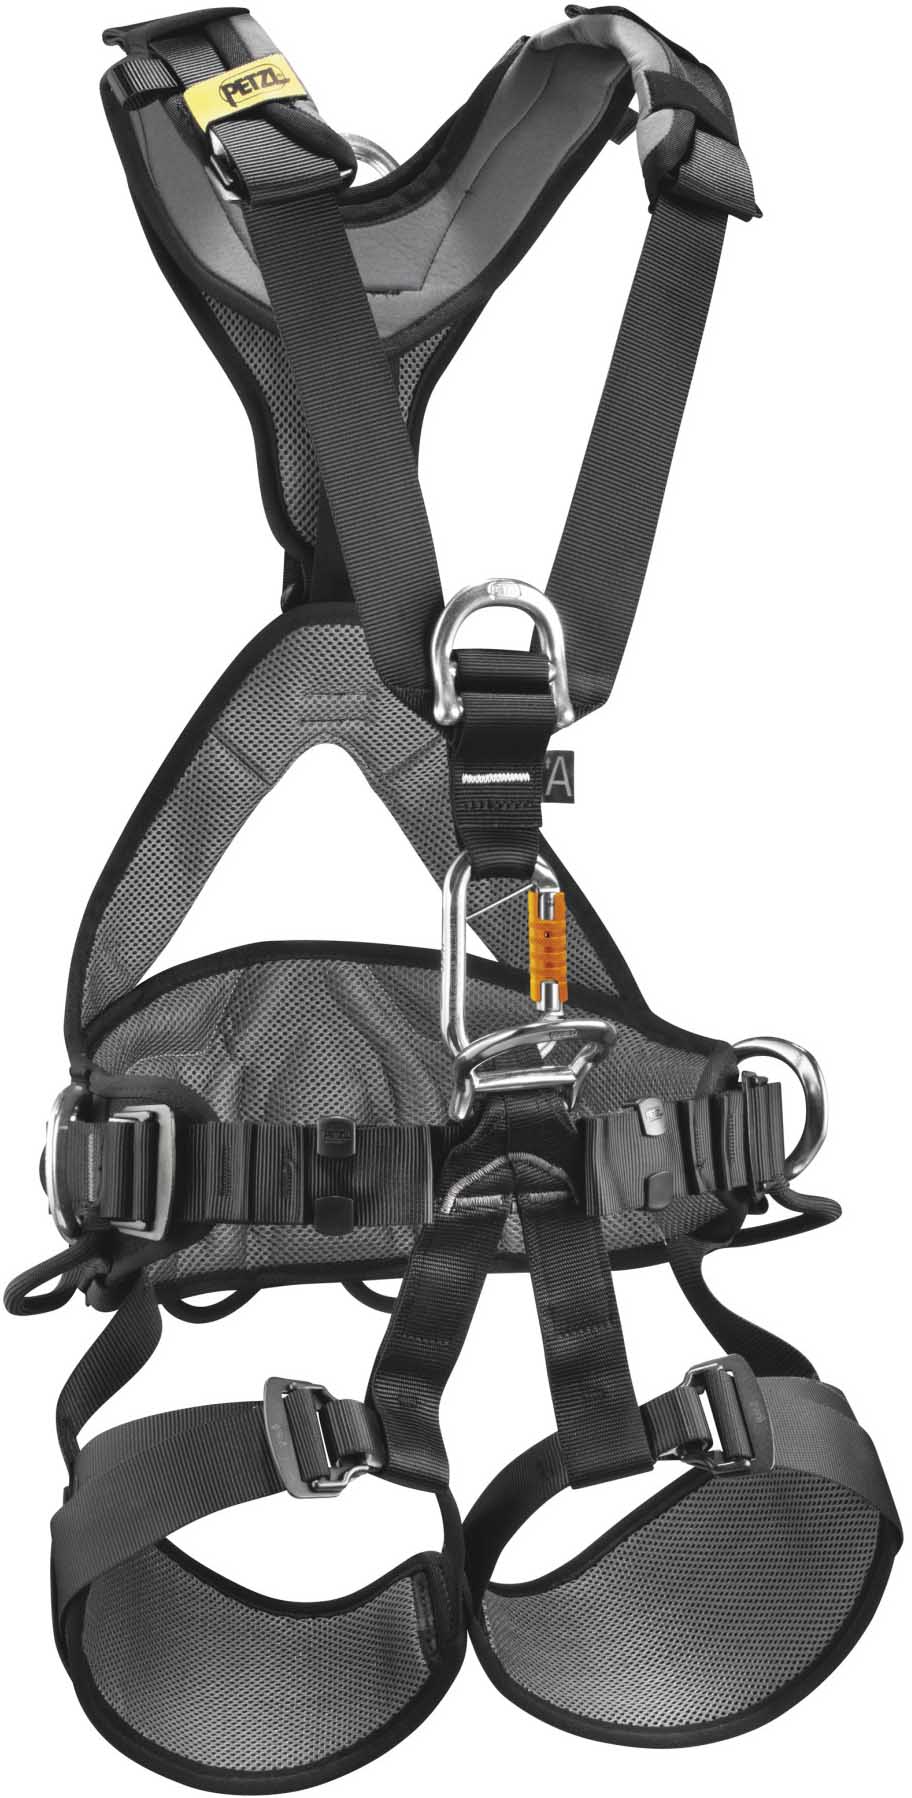 Petzl AVAO BOD Harness from Columbia Safety